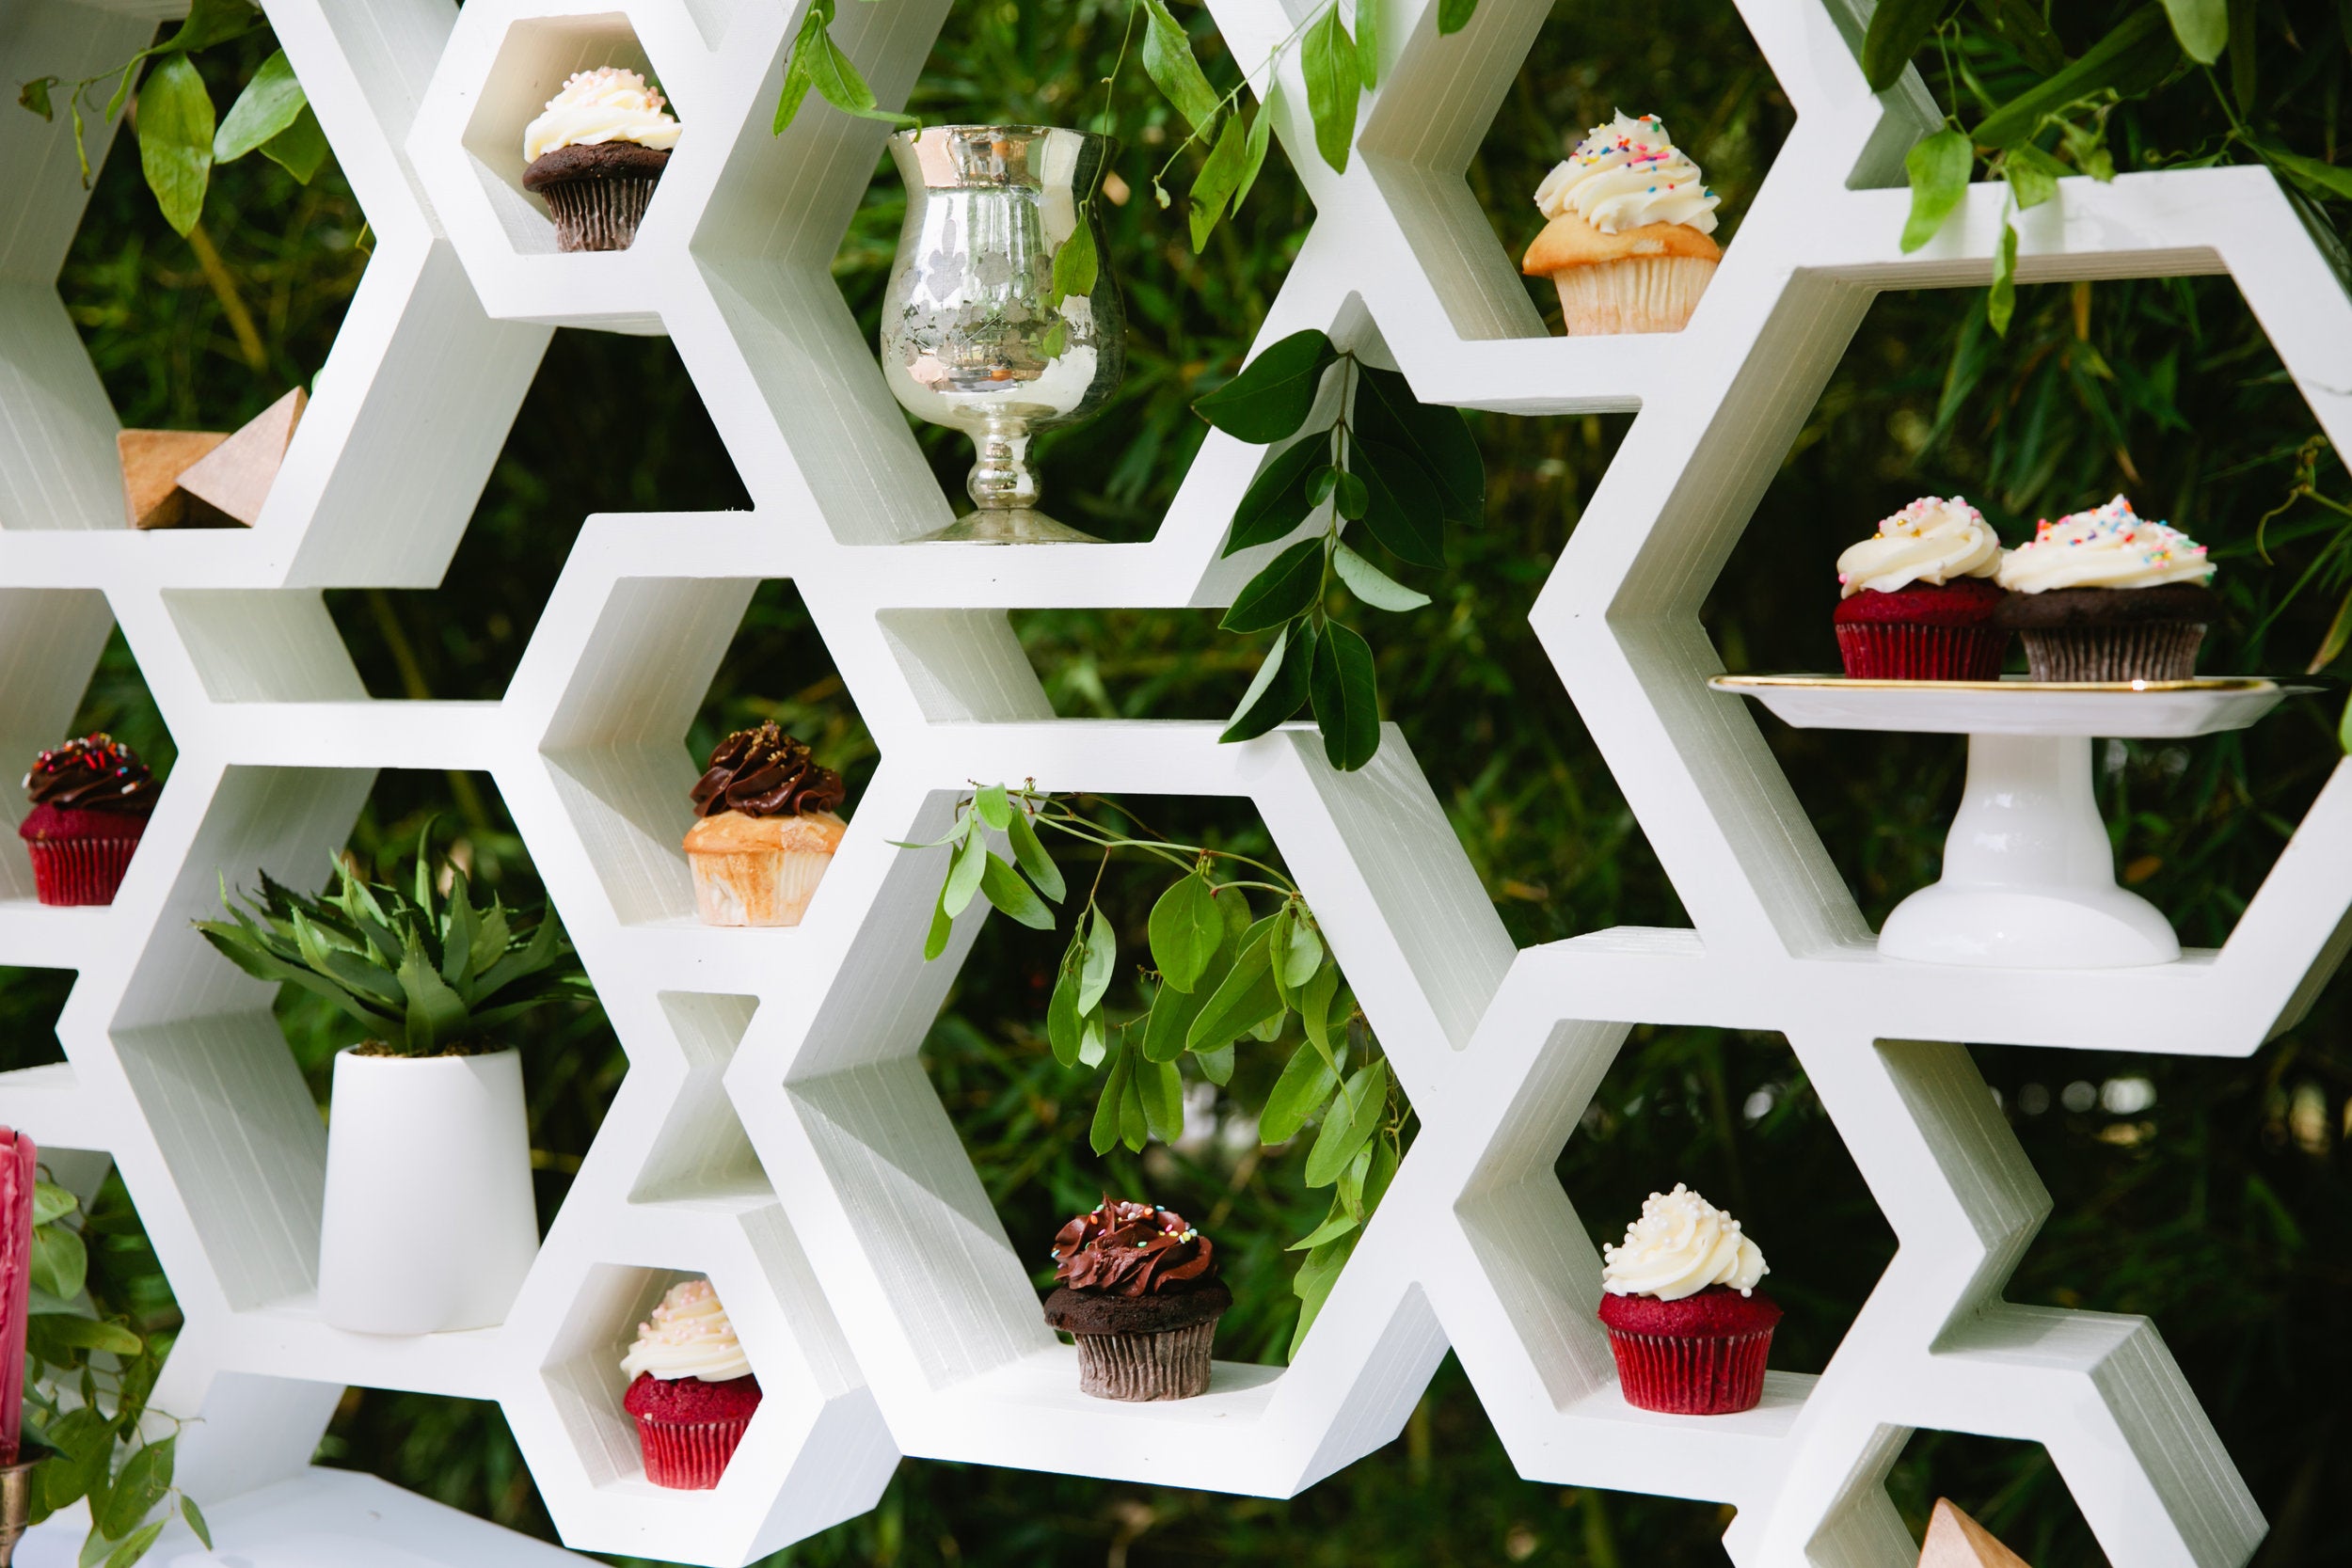 Cupcake and greenery in white hexagonal backdrop piece